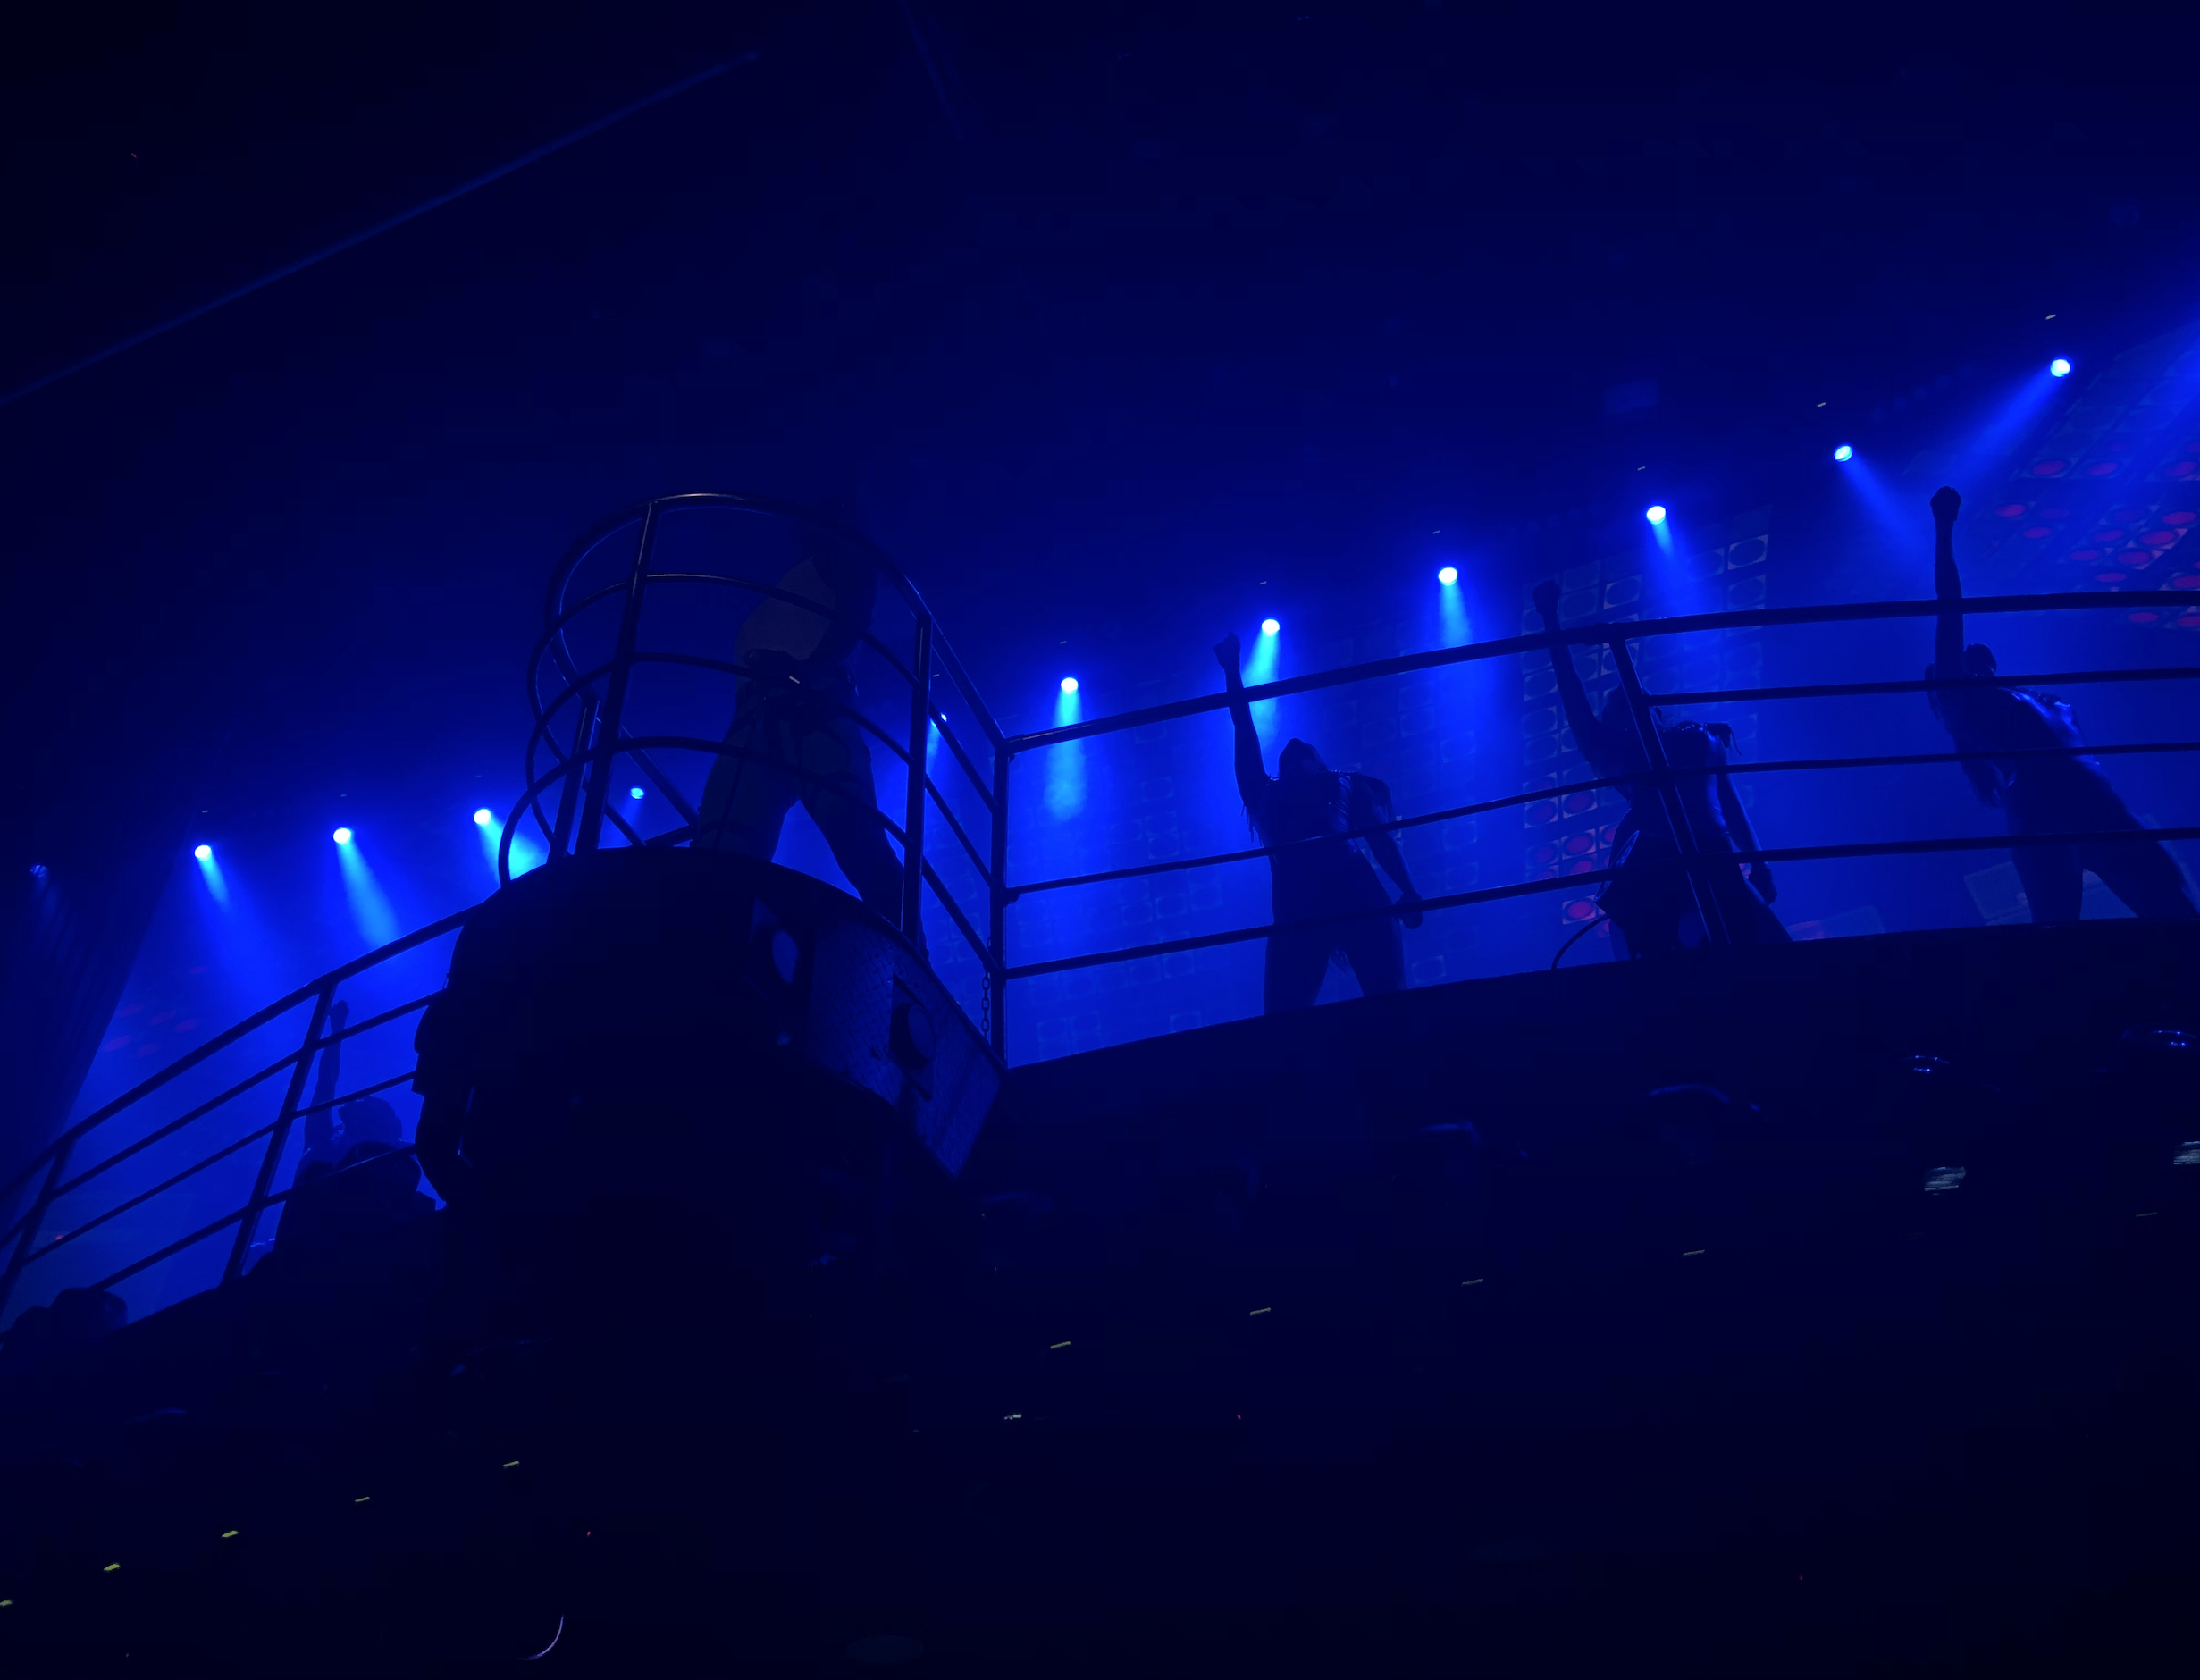 From below shot of a stage with four performers, one featured on a curved, jutted out portion for the platform; the room is dark but the stage is illuminated in bright neon blue light and 3 of the background performers have their fists raised.